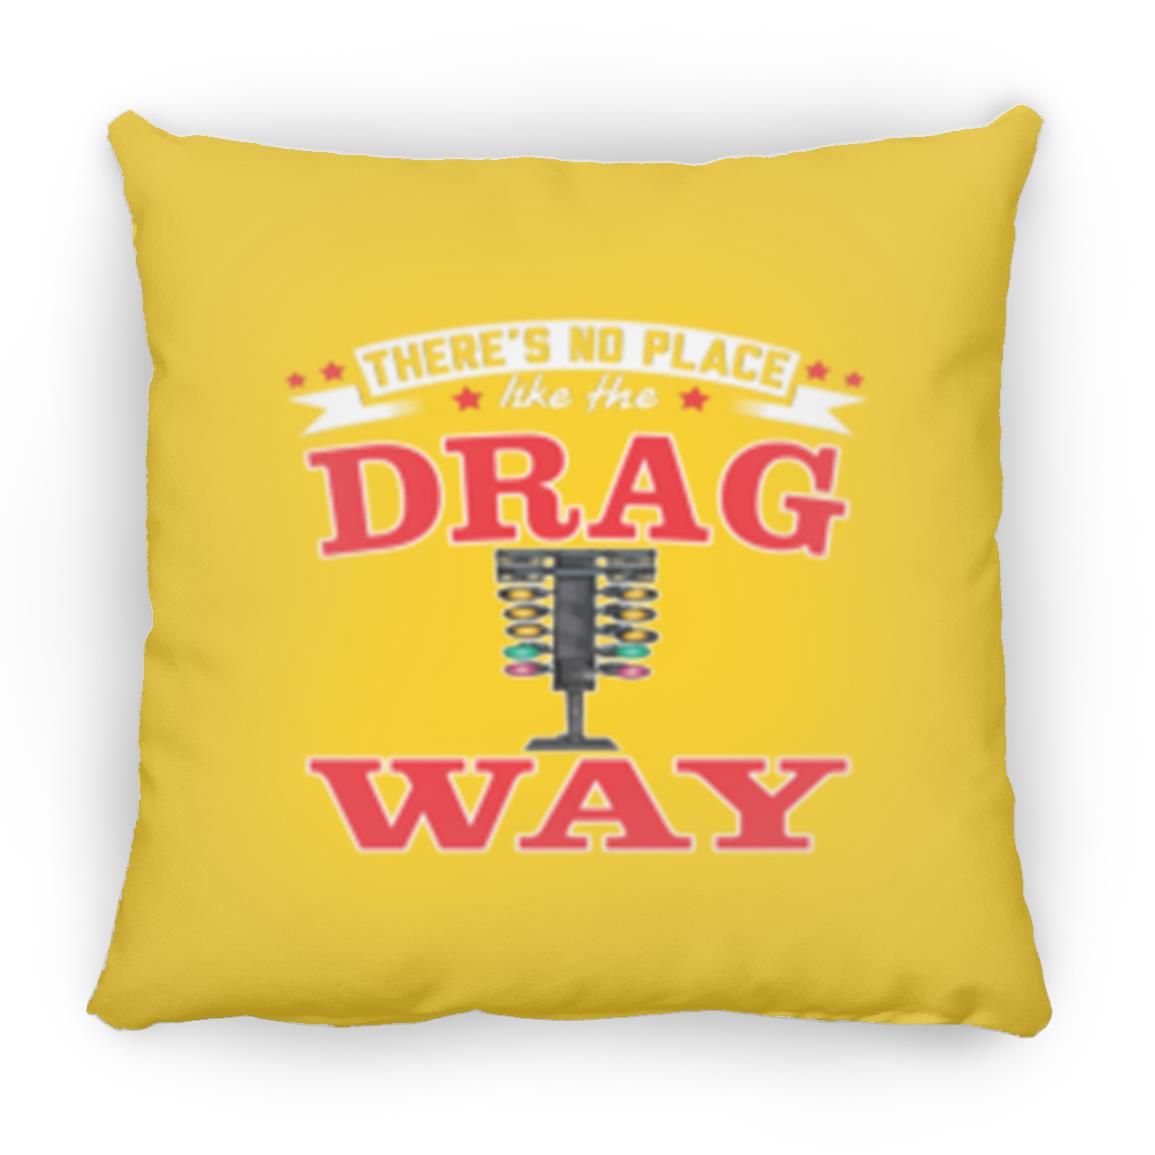 There's No Place Like The Dragway Small Square Pillow